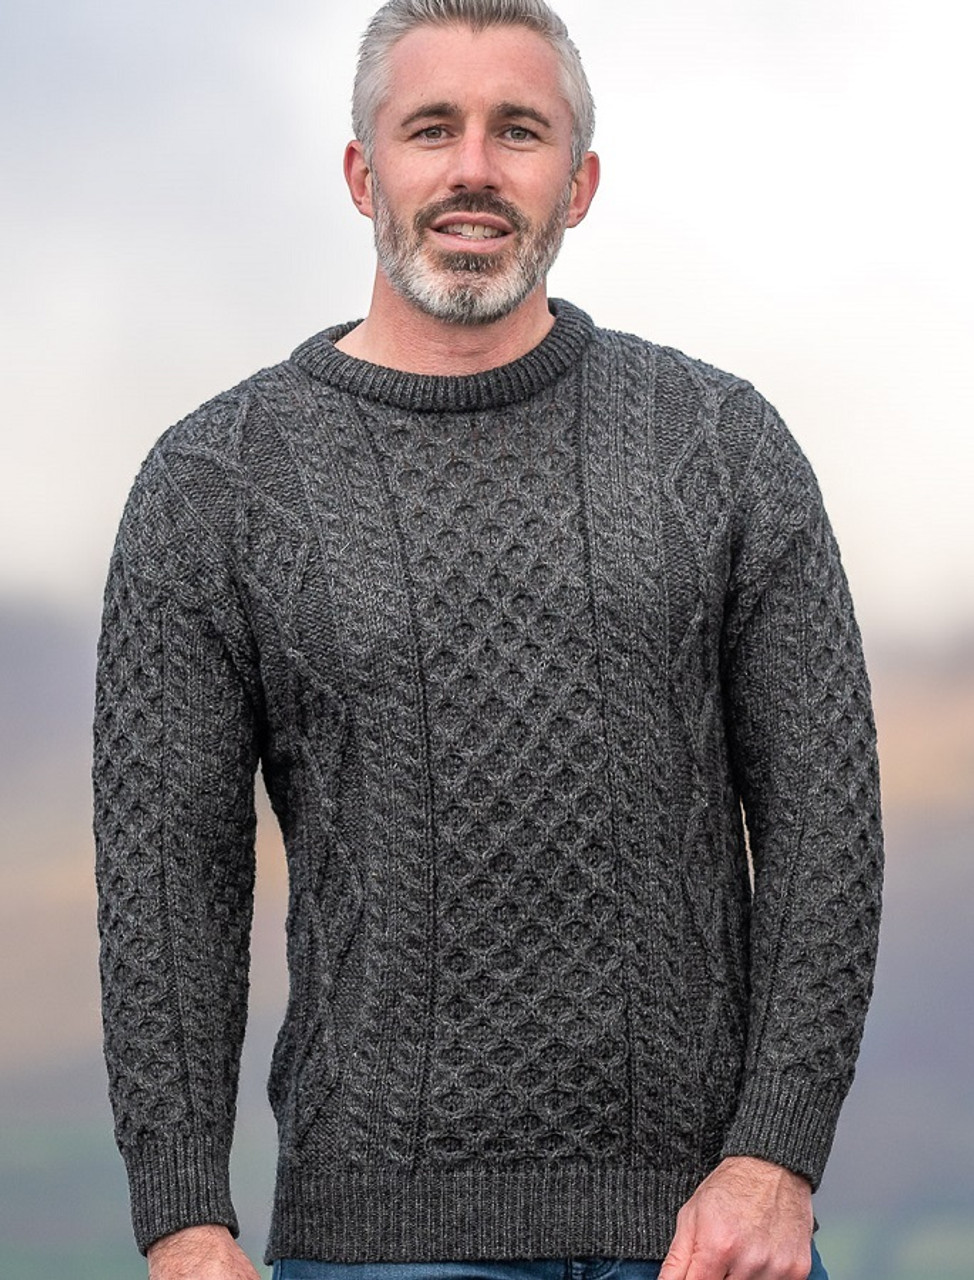 Men's Cable Knit Crew Neck Aran Wool Sweater [Free Express Shipping]